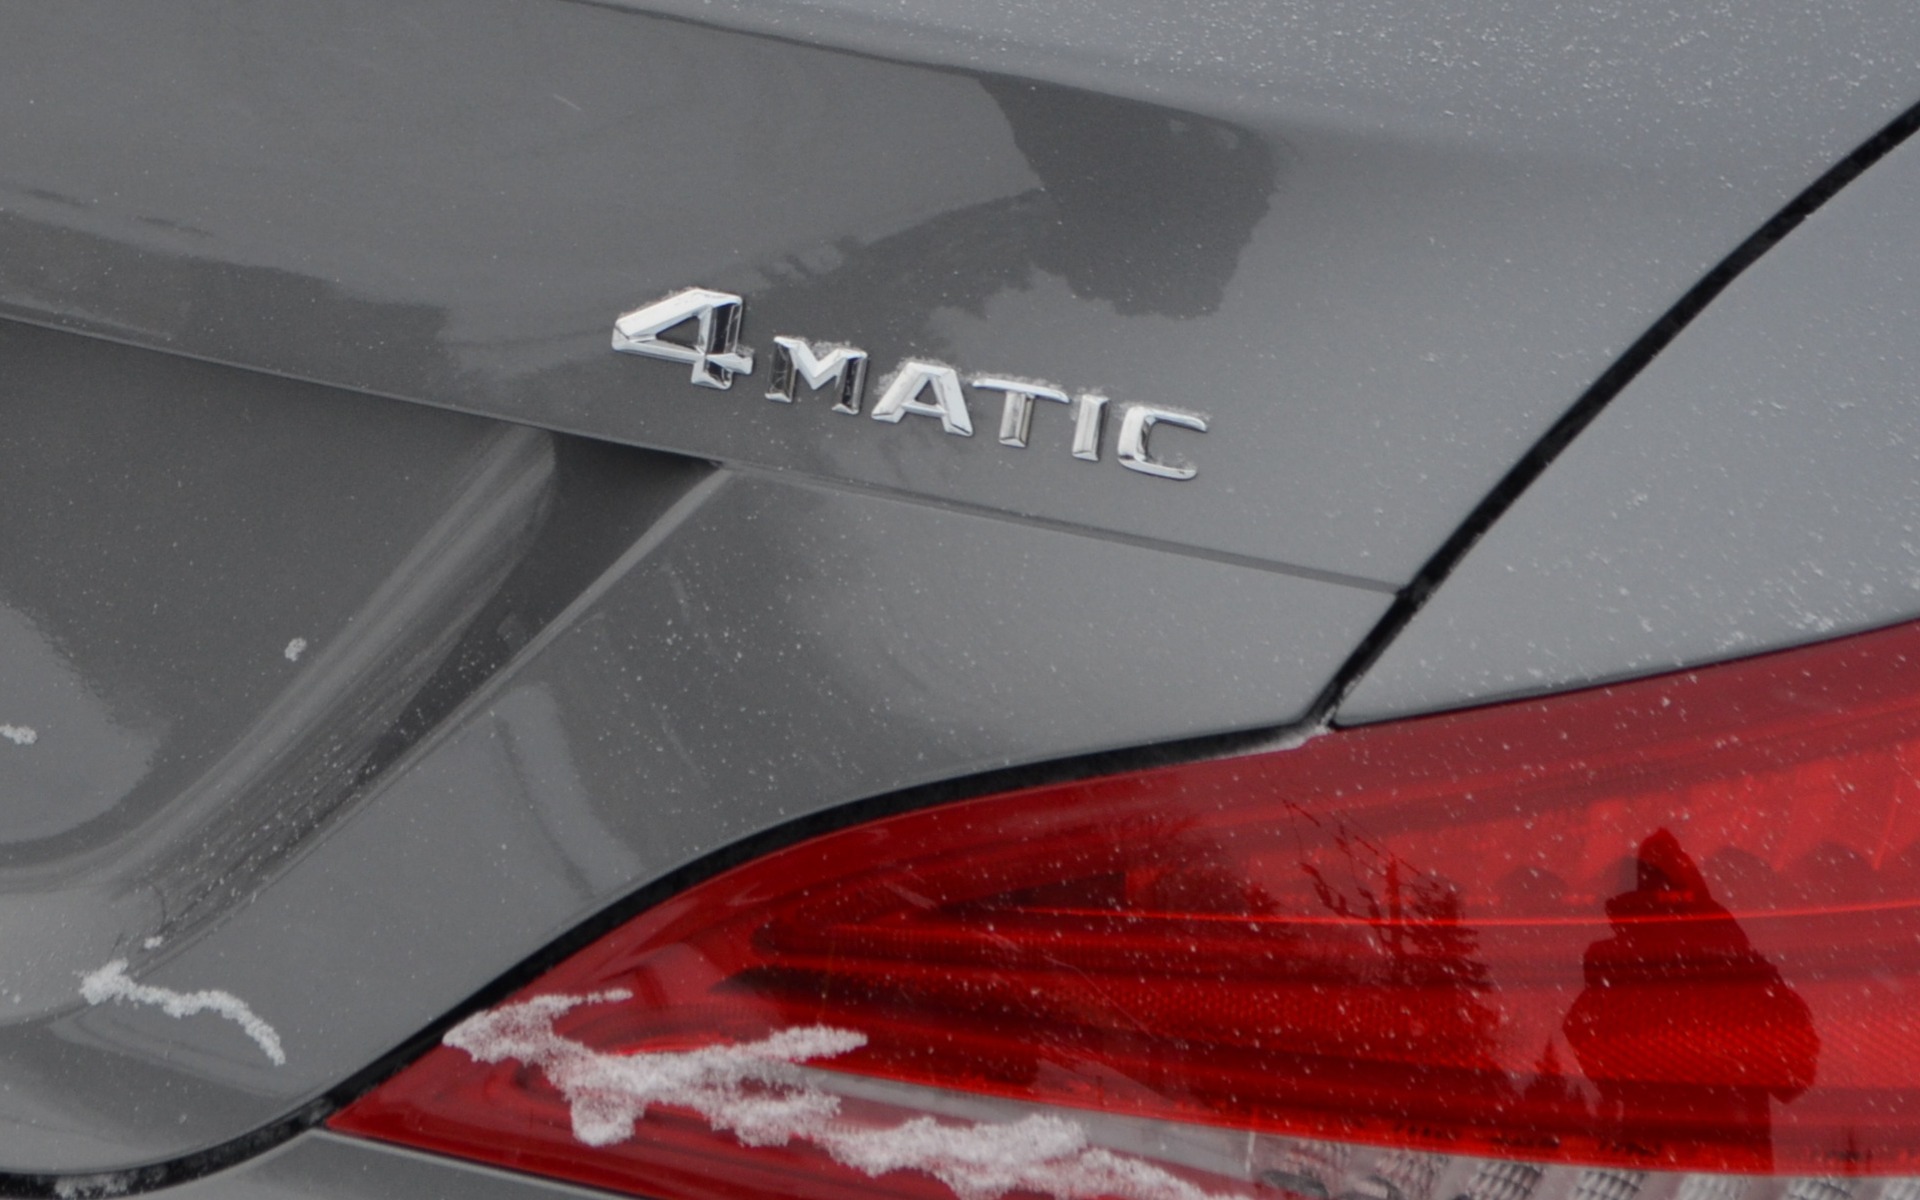 The 4Matic all-wheel drive system is worth the $2,200 asking price.